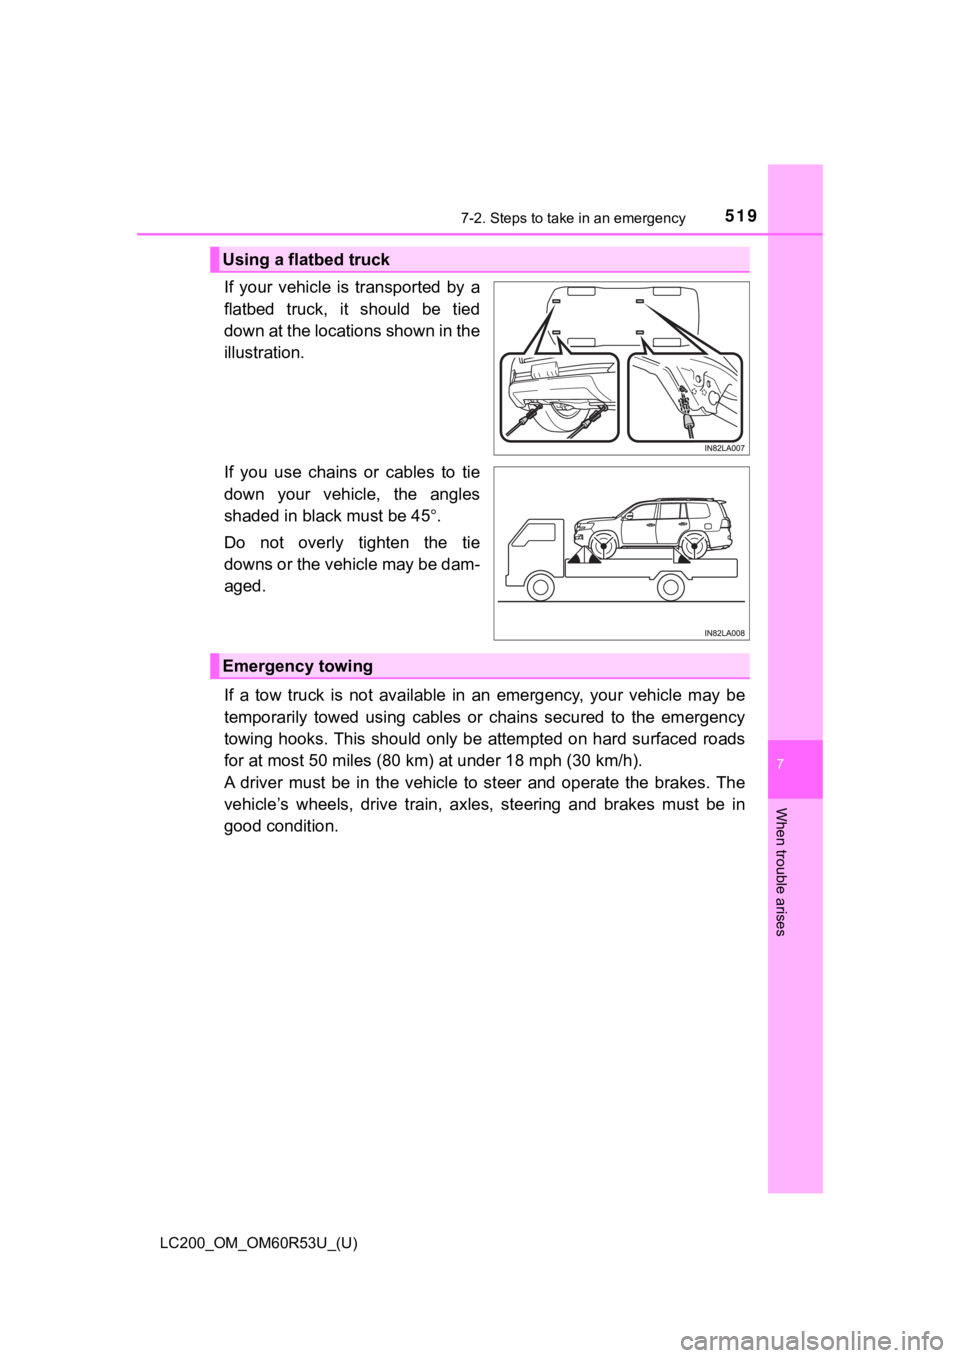 TOYOTA LAND CRUISER 2020  Owners Manual (in English) 5197-2. Steps to take in an emergency
LC200_OM_OM60R53U_(U)
7
When trouble arises
If  your  vehicle  is  transported  by  a
flatbed  truck,  it  should  be  tied
down at the locations shown in the
ill